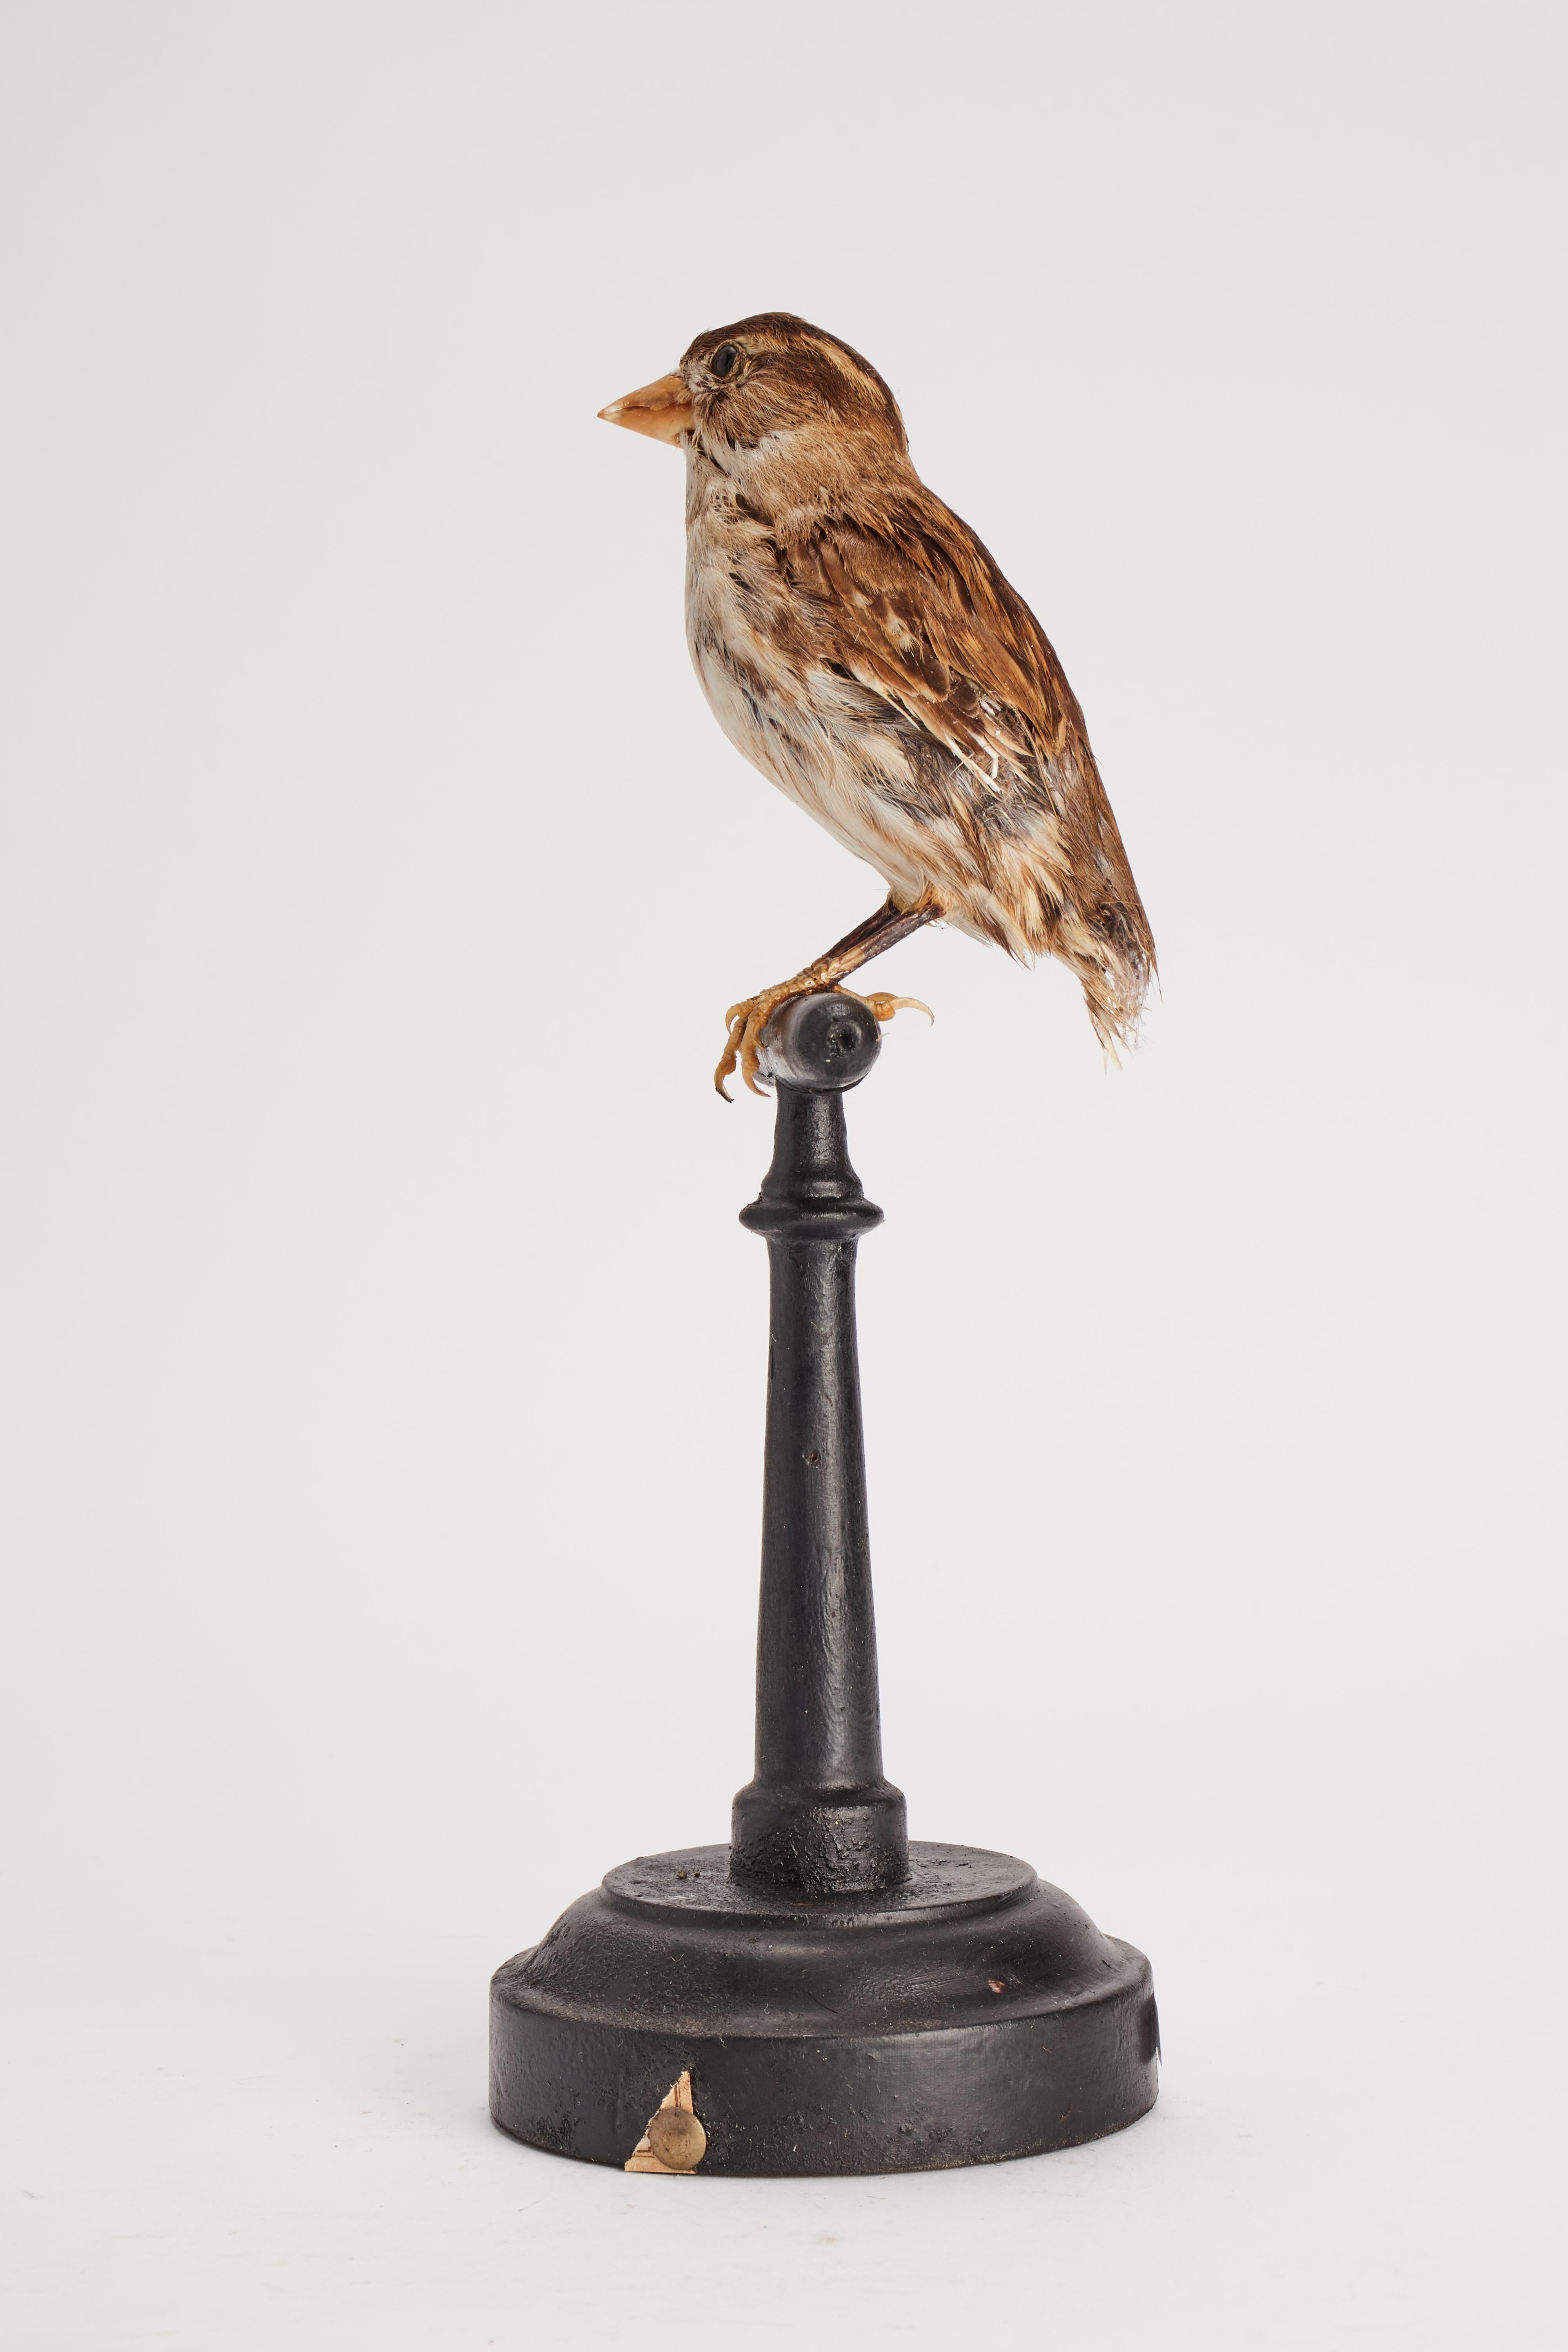 Italian Stuffed bird for natural history cabinet, an house sparrow, Italy 1880. For Sale